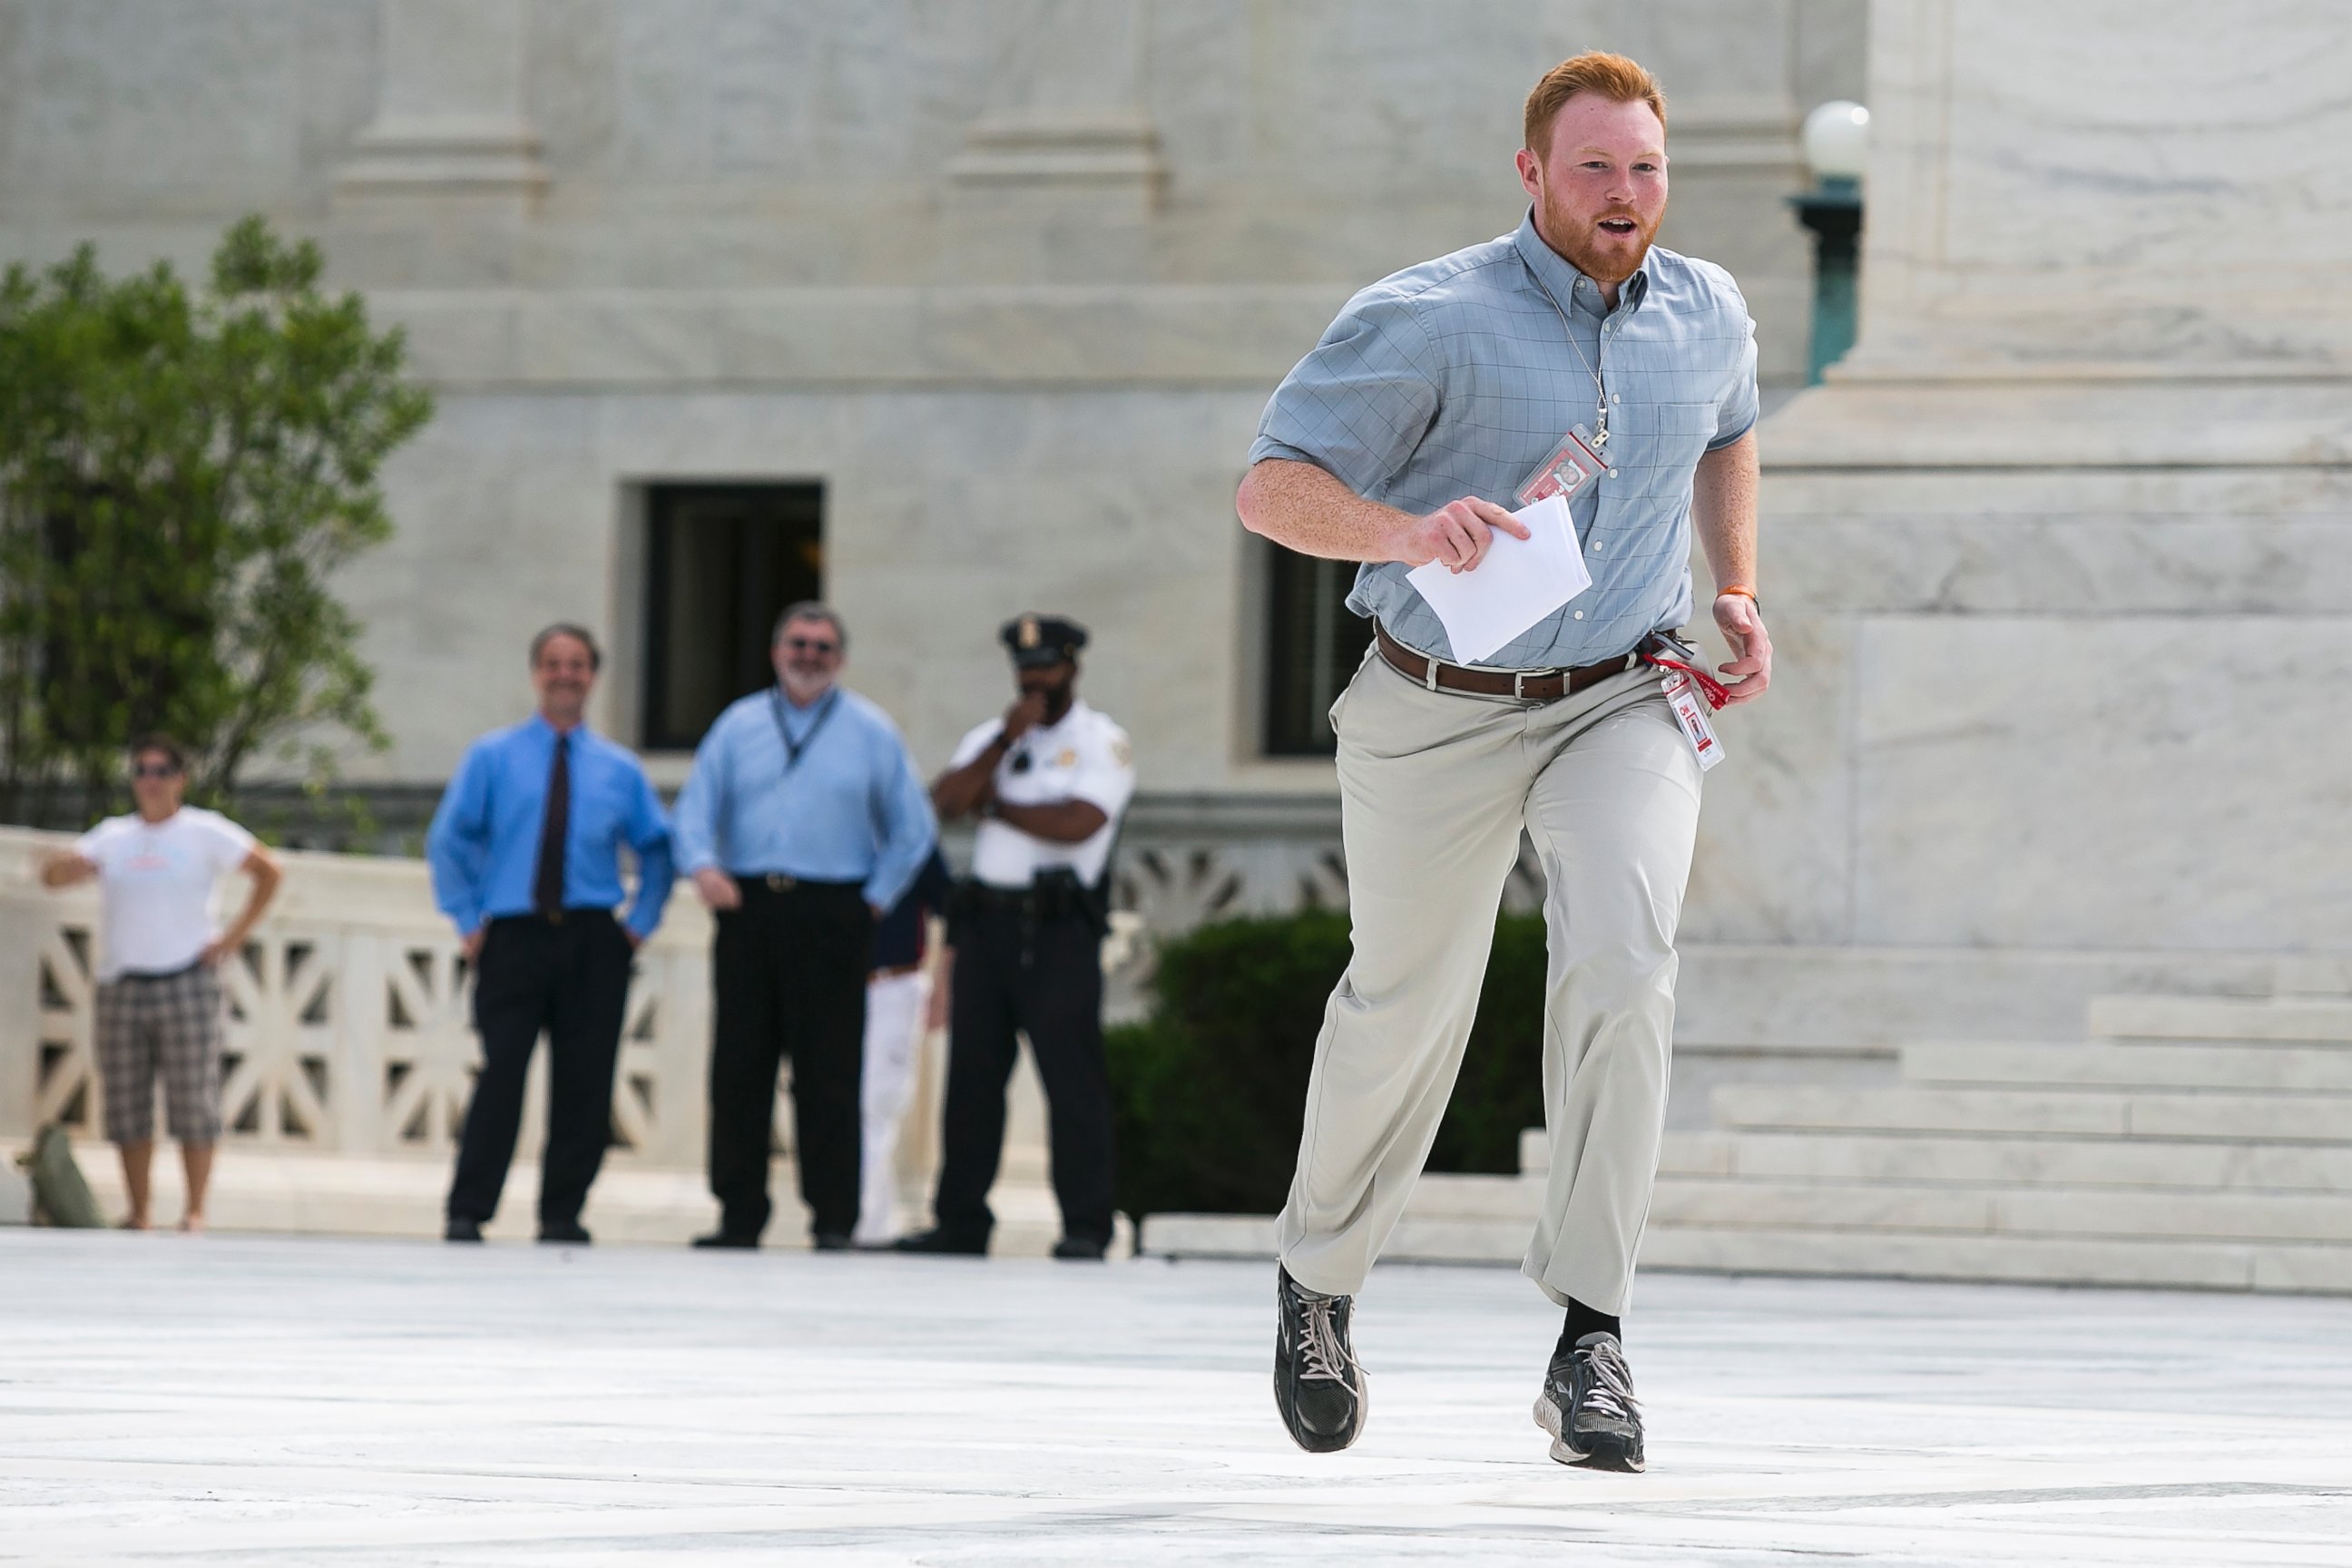 PHOTO: Members of the news media, including interns for network television stations, run with decisions in hand on the opinion for health care in Washington, June 25, 2015, in an official tradition referred to as the "running of the interns." 